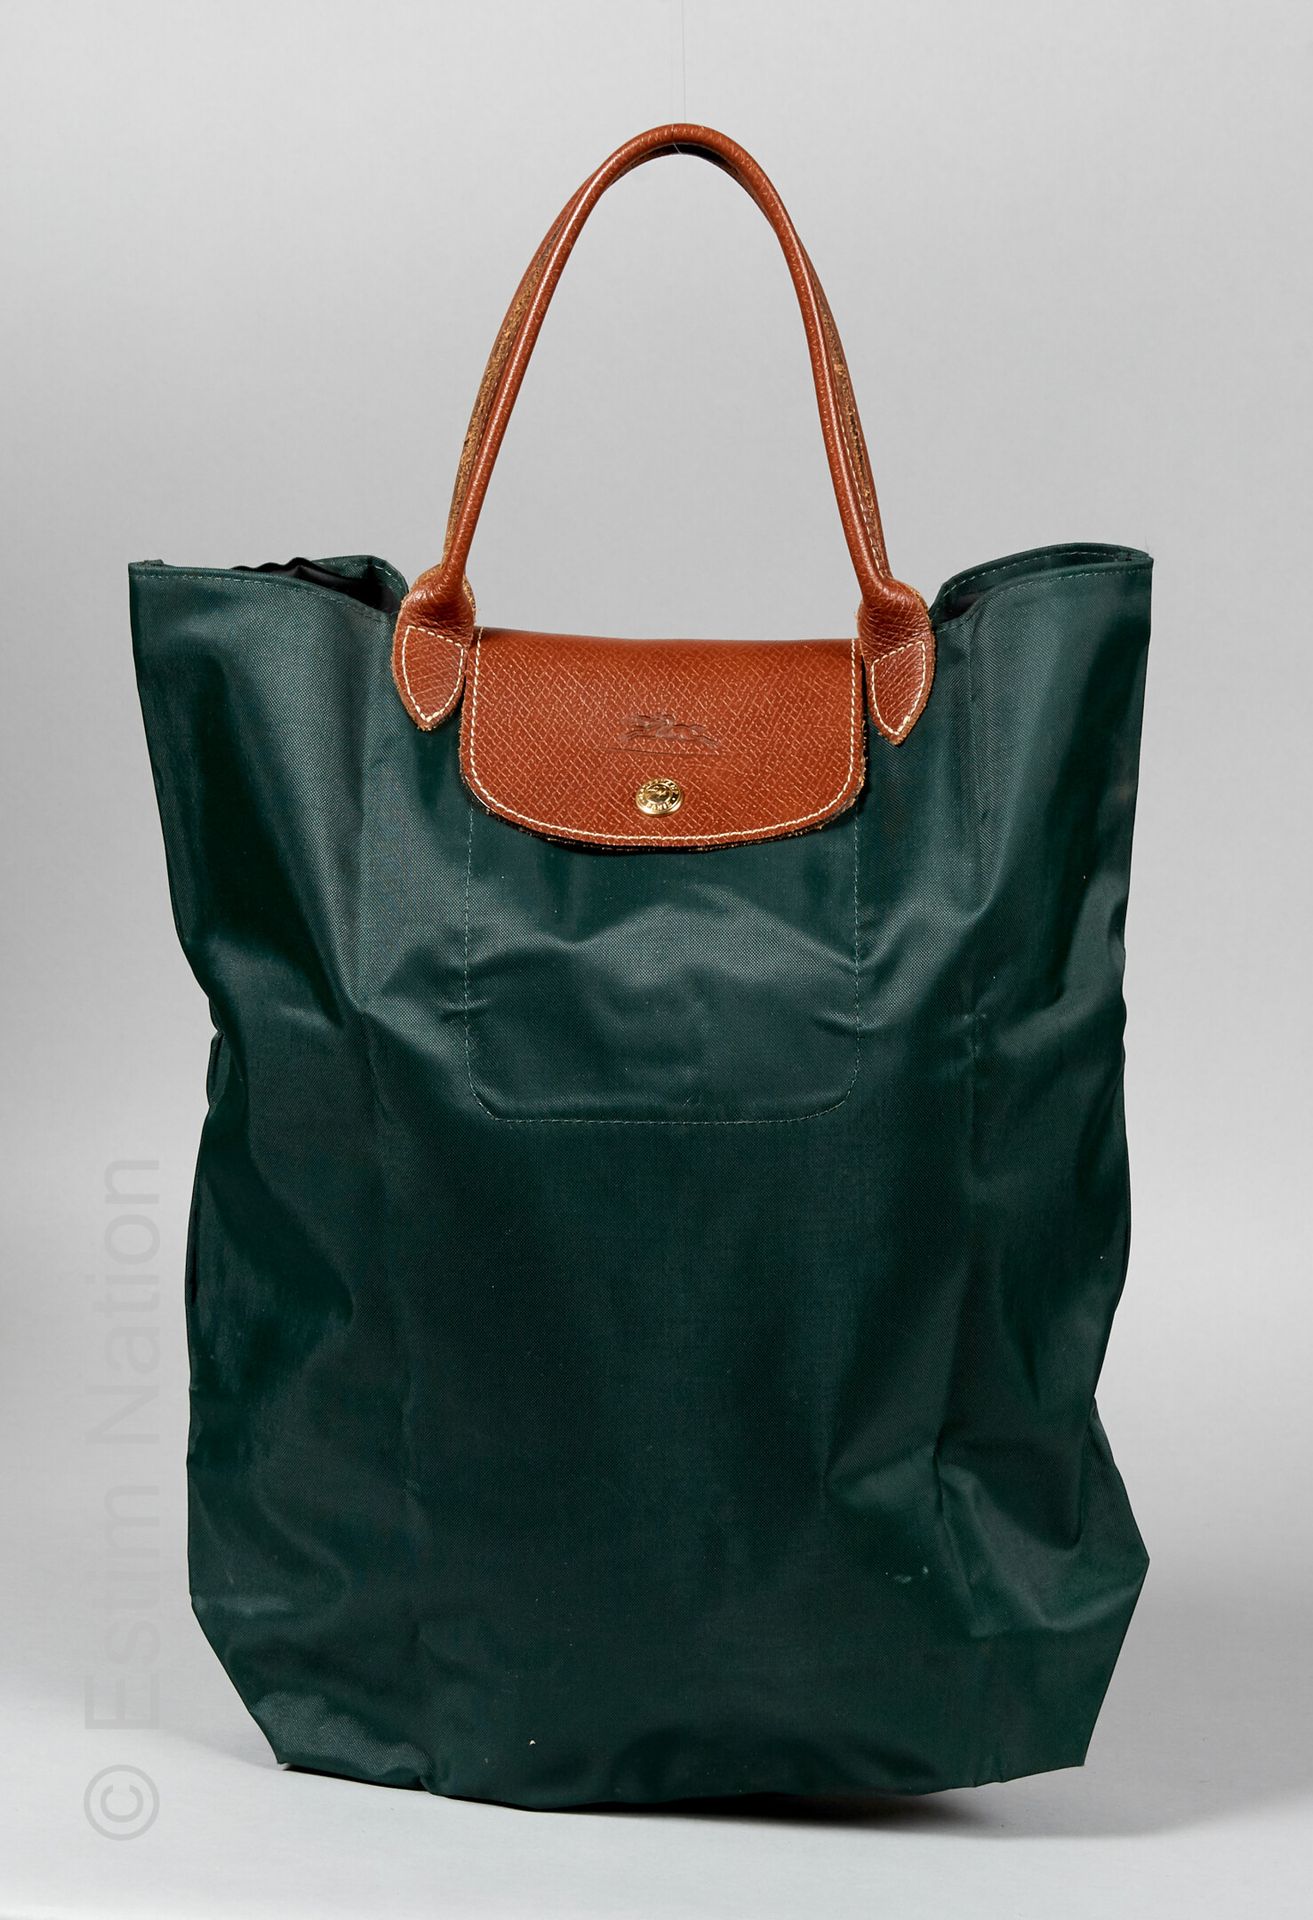 LONGCHAMP BAG "PLIAGE" tote in bottle green polyester and cognac leather (38 x 3&hellip;